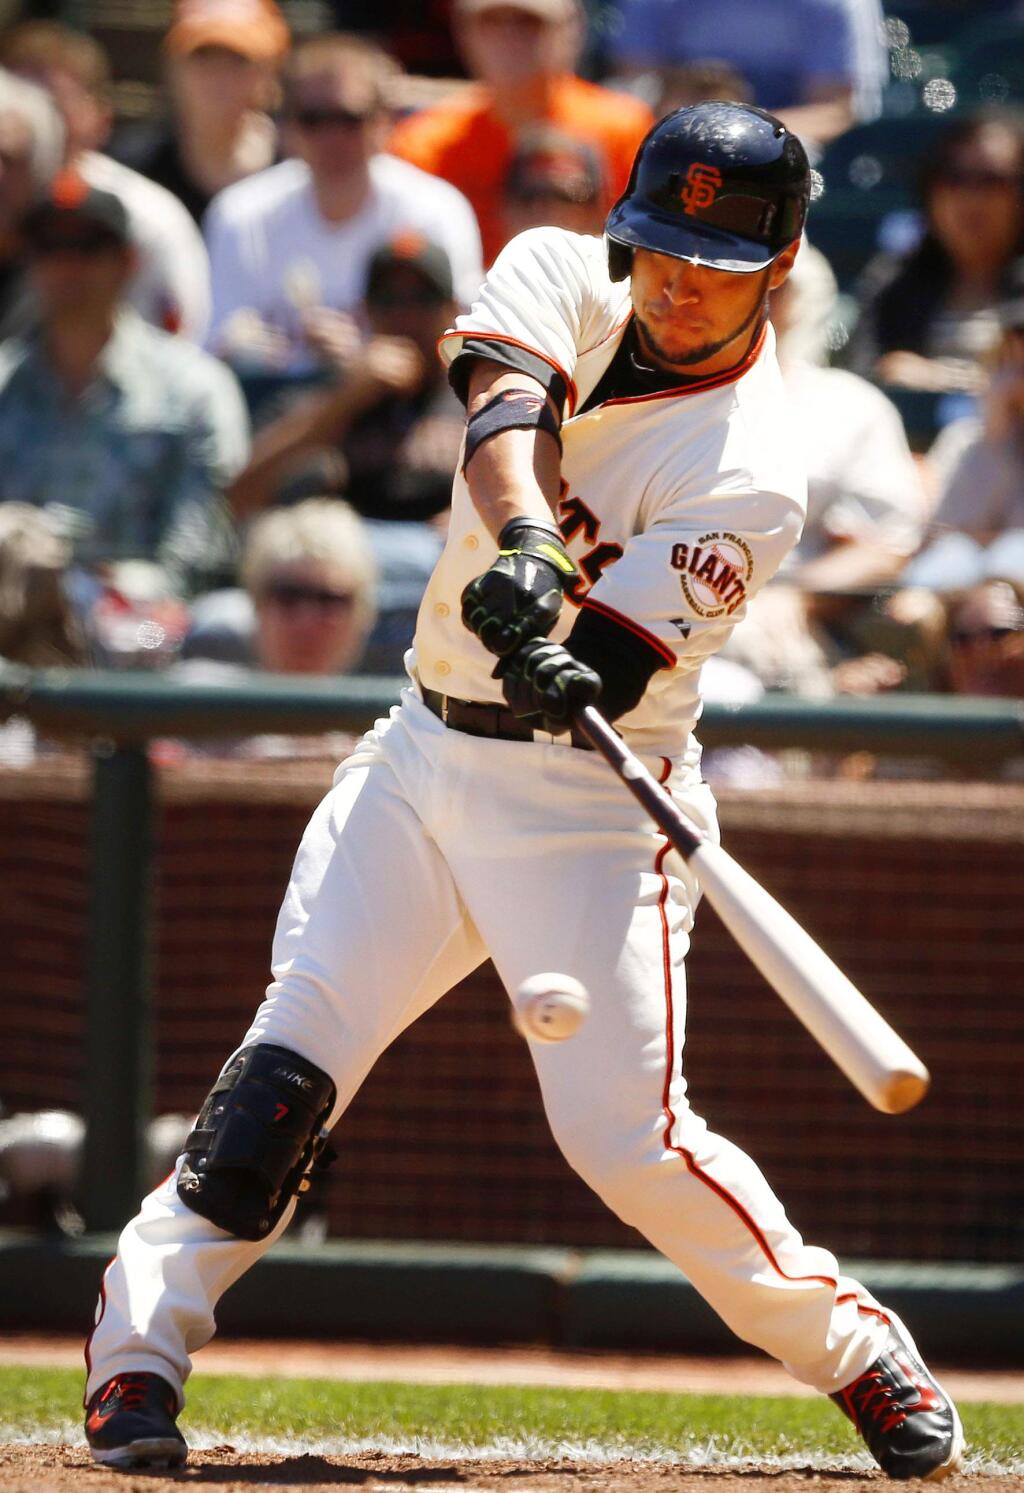 San Francisco Giants Gregor Blanco hits a single during his game against the Washington Nationals at AT&T Park on Thursday, June 12, 2014. (Conner Jay/The Press Democrat)